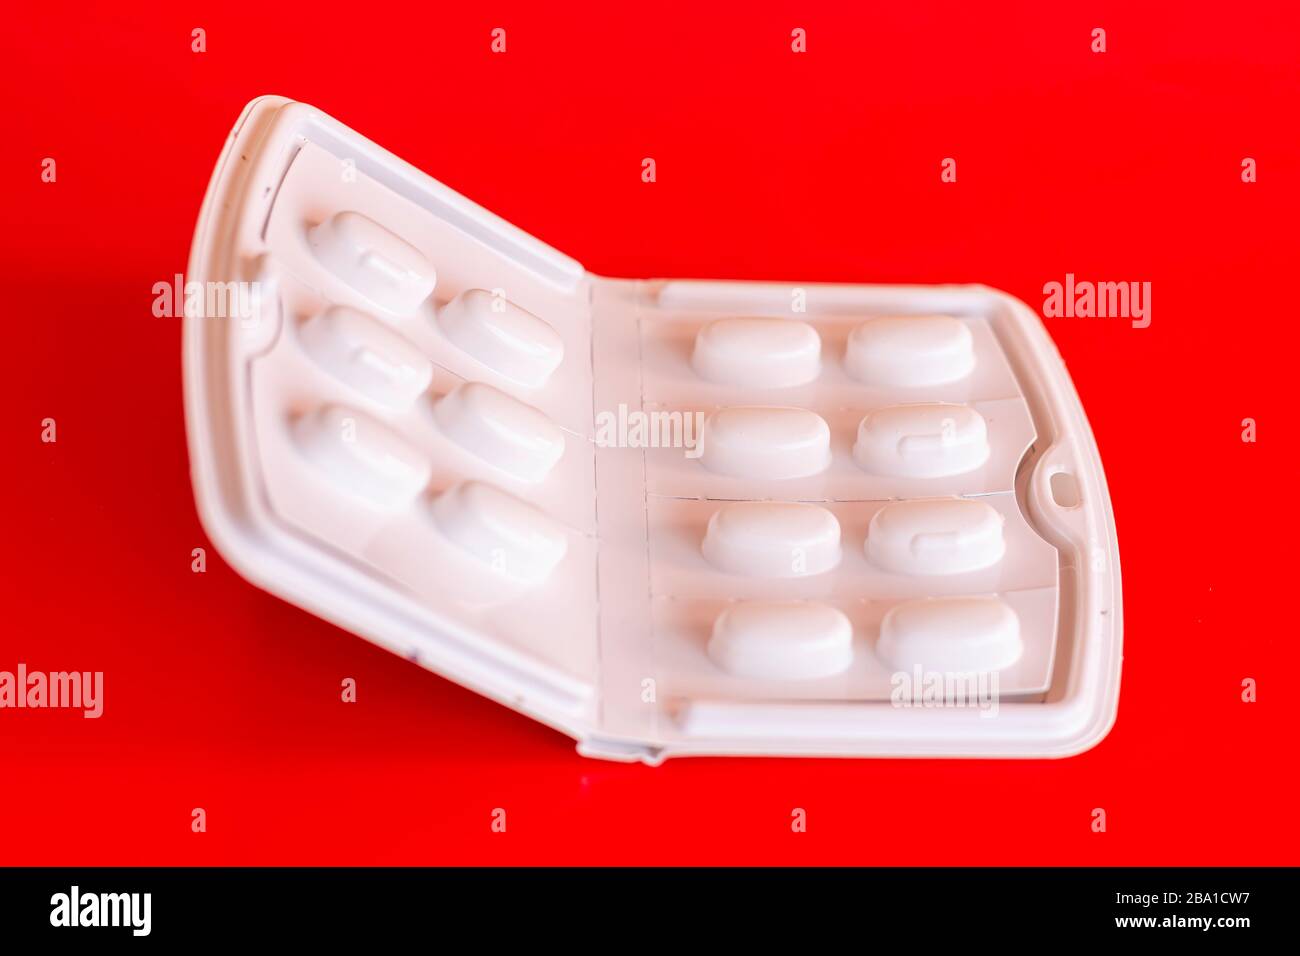 White booklet of painkillers pills on red background.Blister of generic paracetamol tablets.No people and copy space.Popular Over-counter medication. Stock Photo